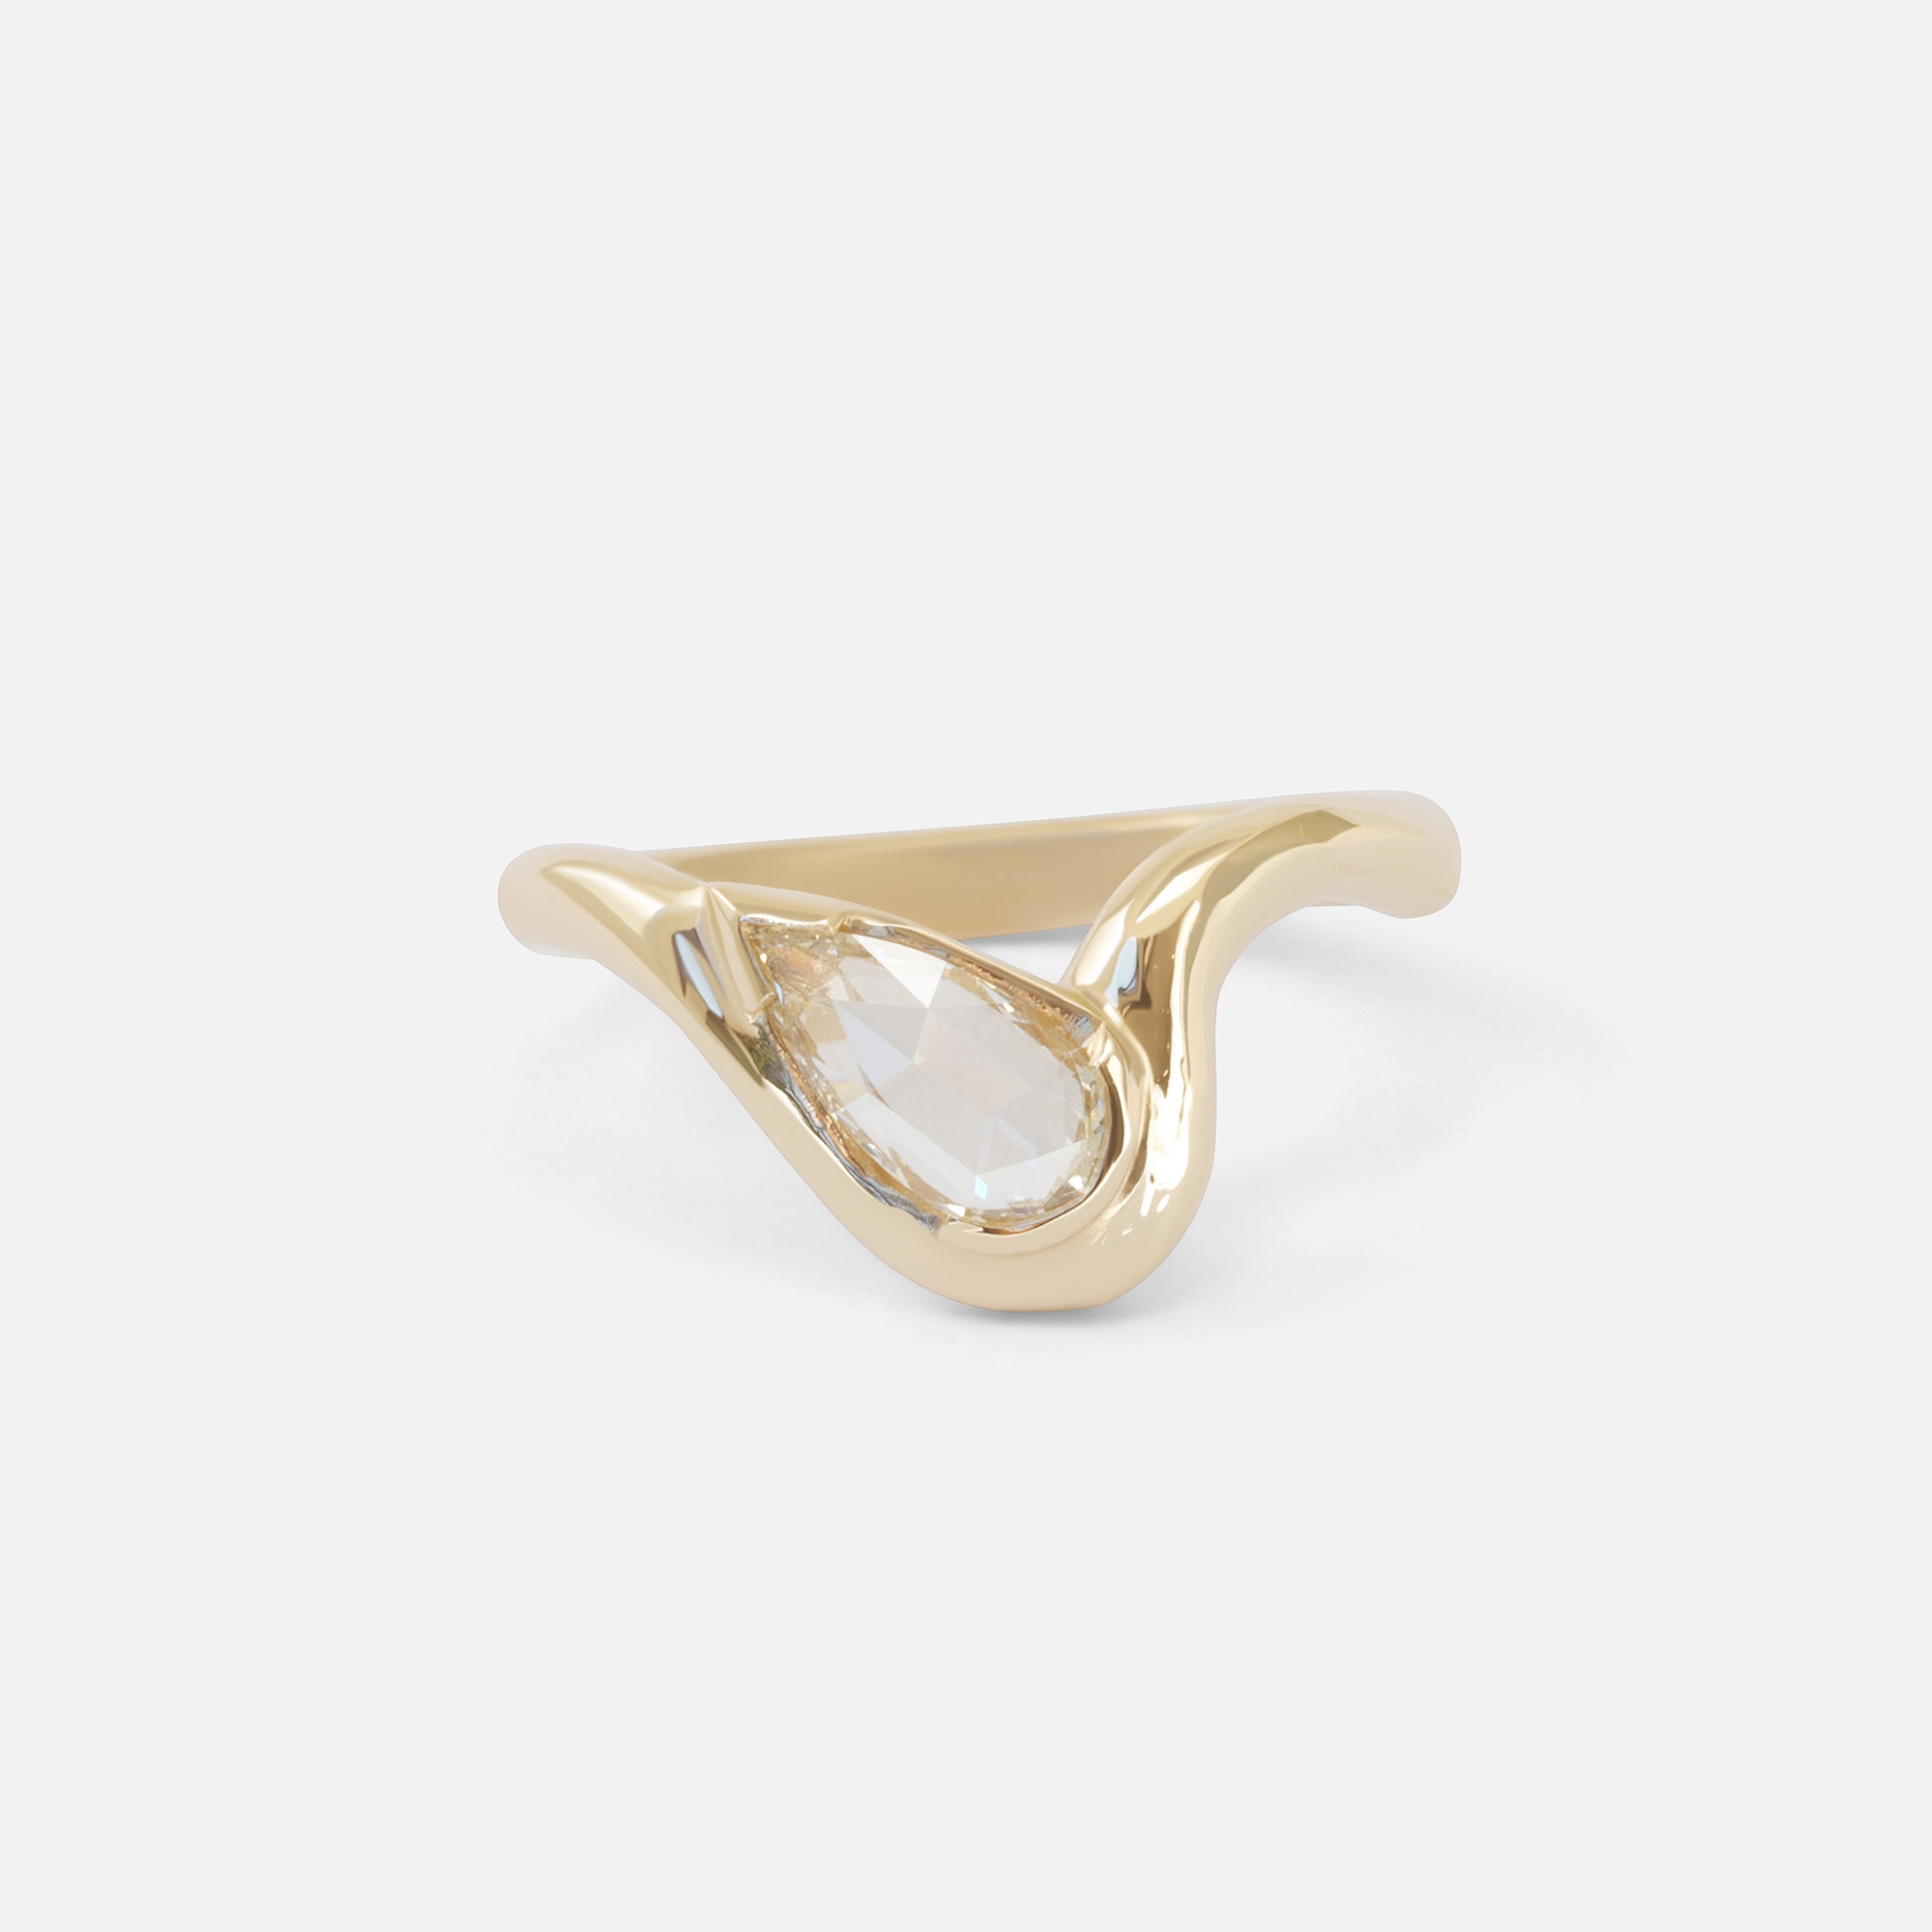 Pear Dip Ring By Kestrel Dillon in ENGAGEMENT Category